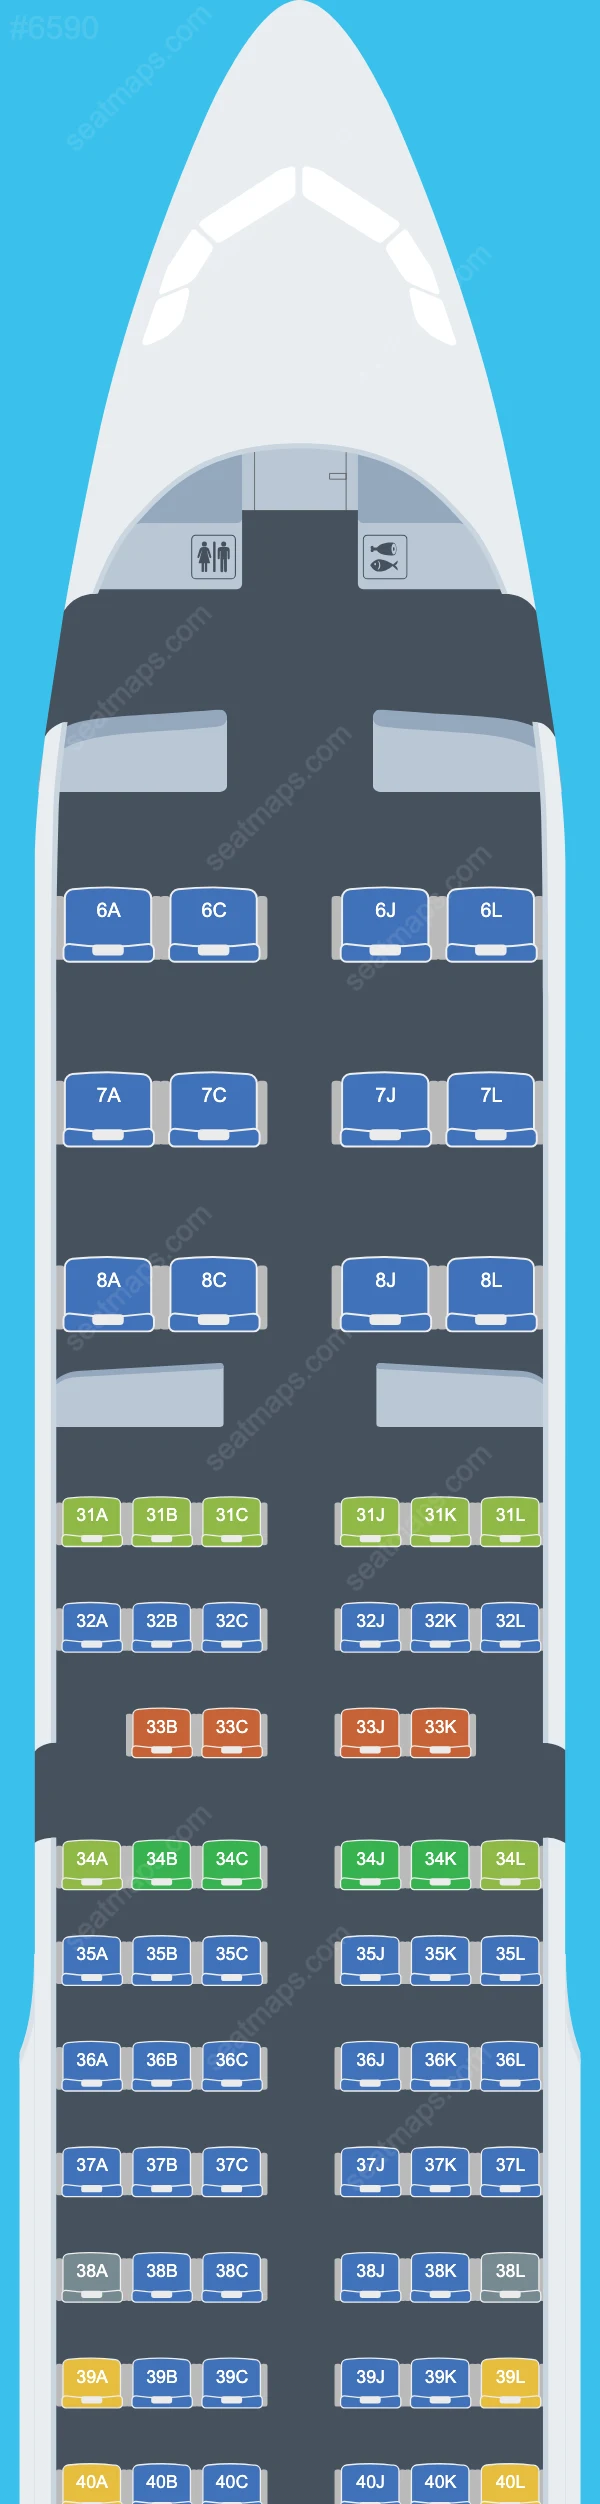 China Eastern Airbus A321 Seat Maps A321-200 V.3